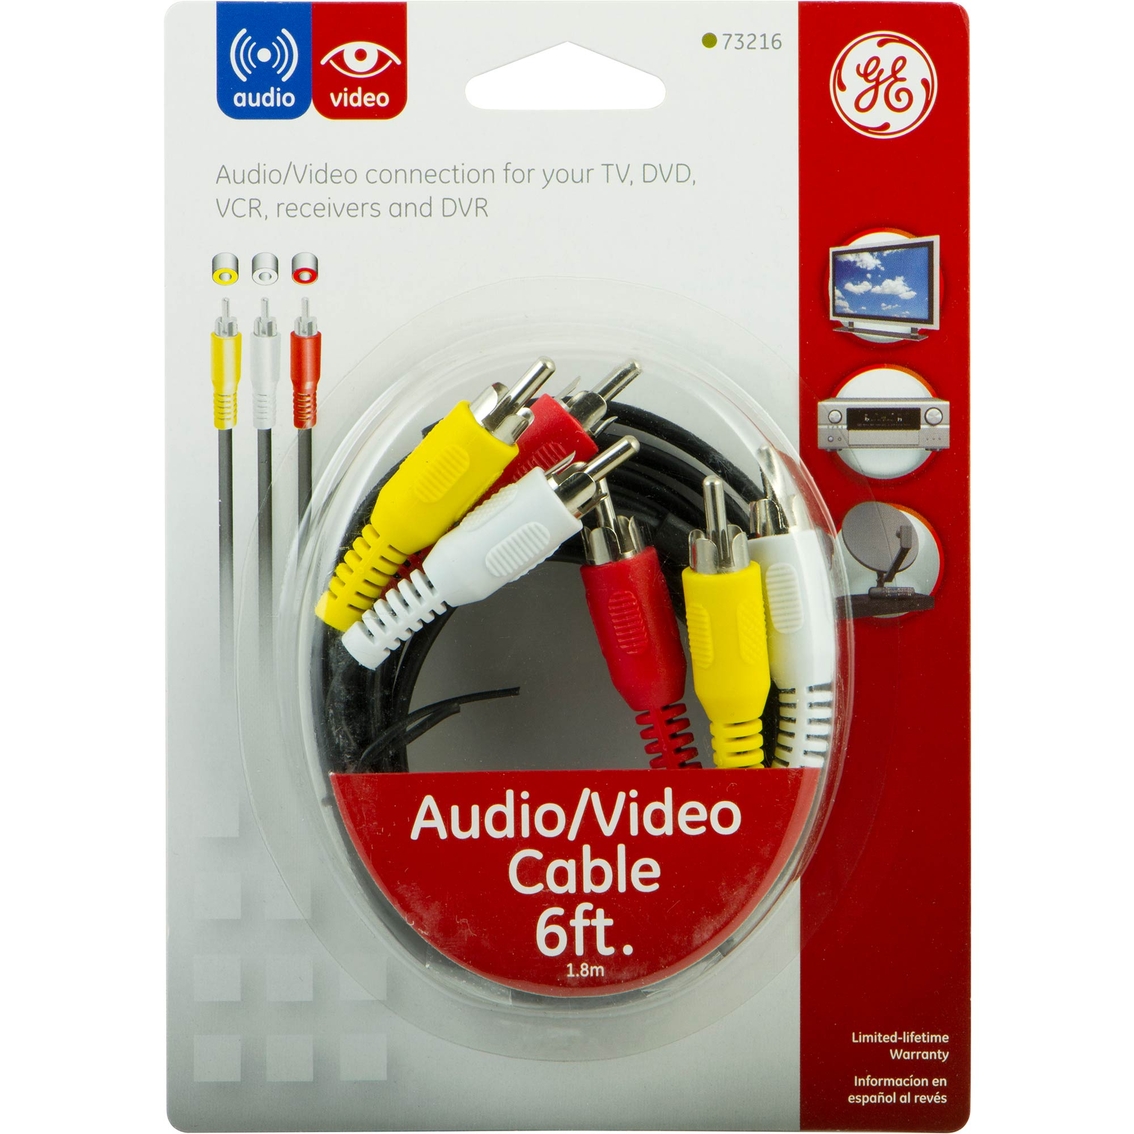 GE 6 ft. Audio/Video Cable - Image 2 of 2